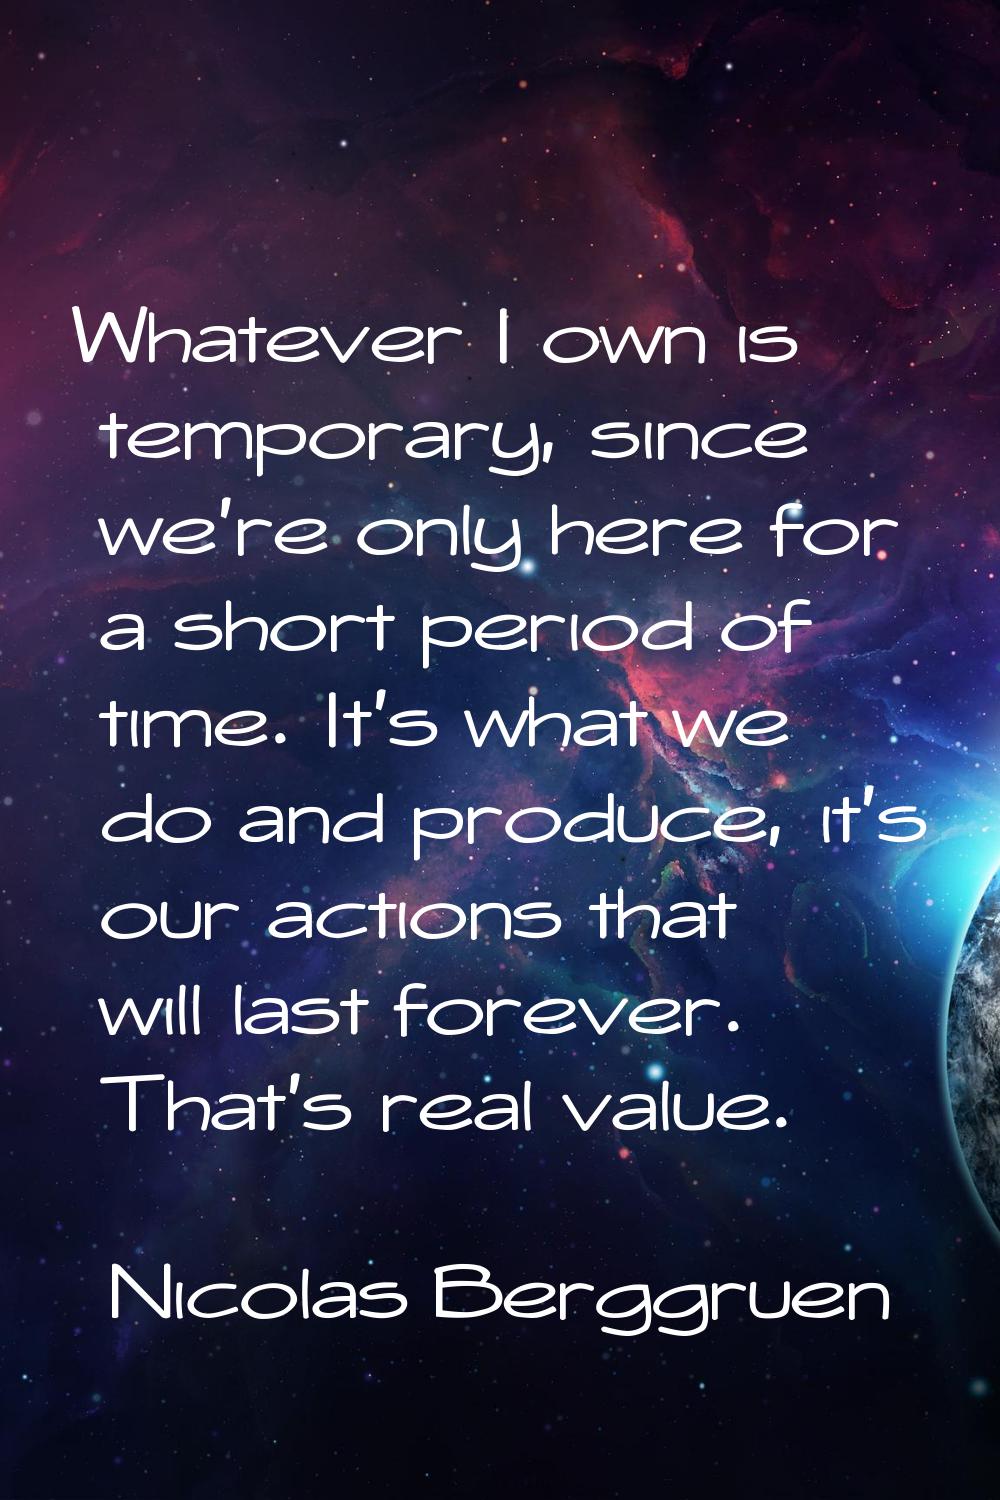 Whatever I own is temporary, since we're only here for a short period of time. It's what we do and 